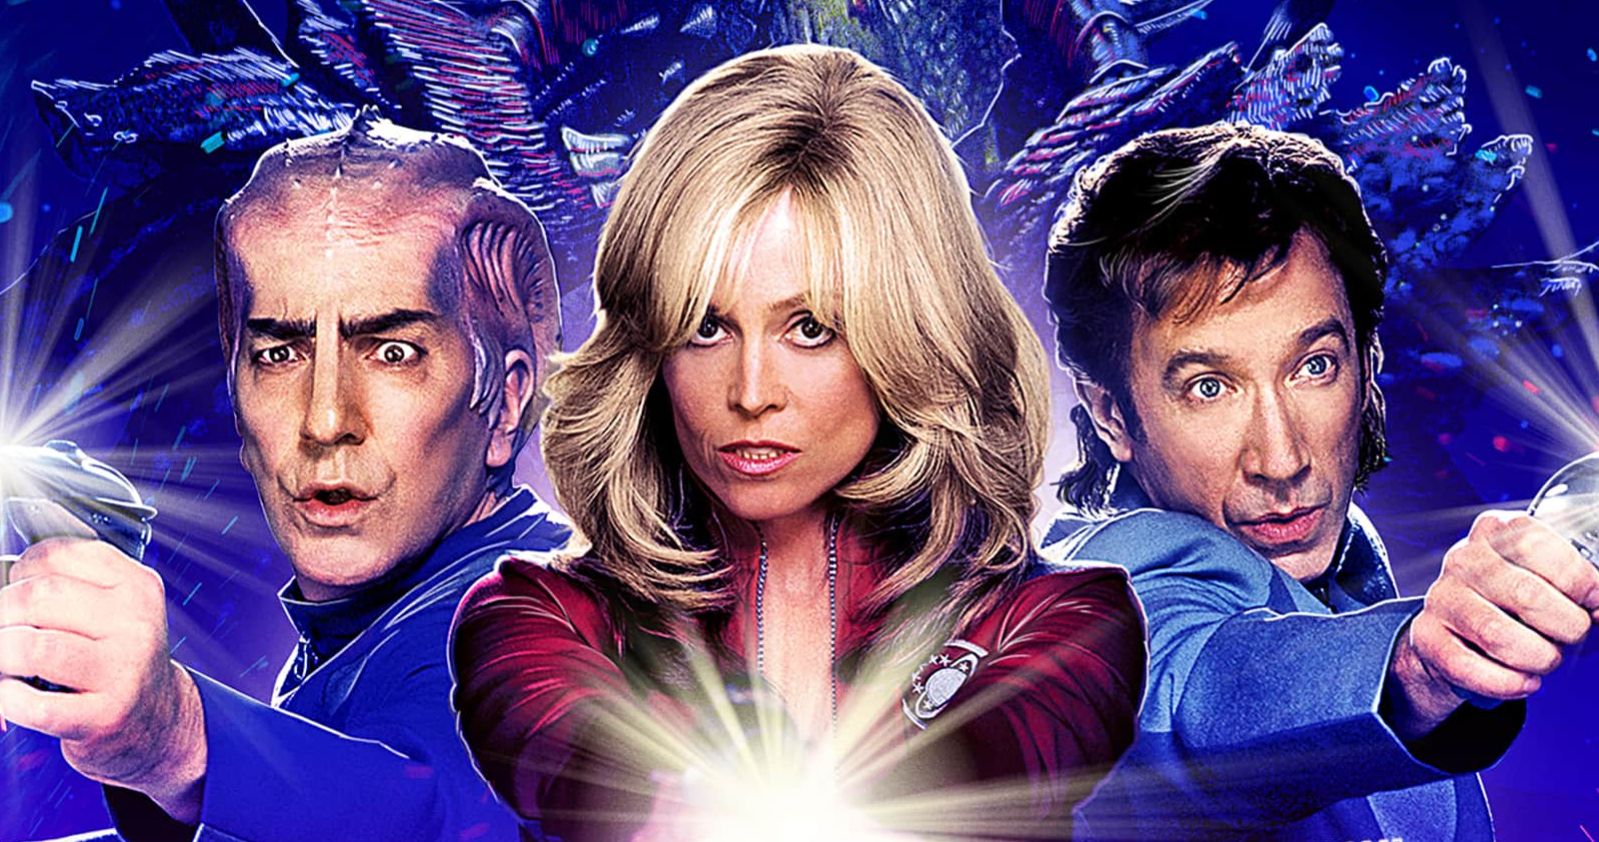 Galaxy Quest Gets a Limited Steelbook Blu-ray for 20th Anniversary